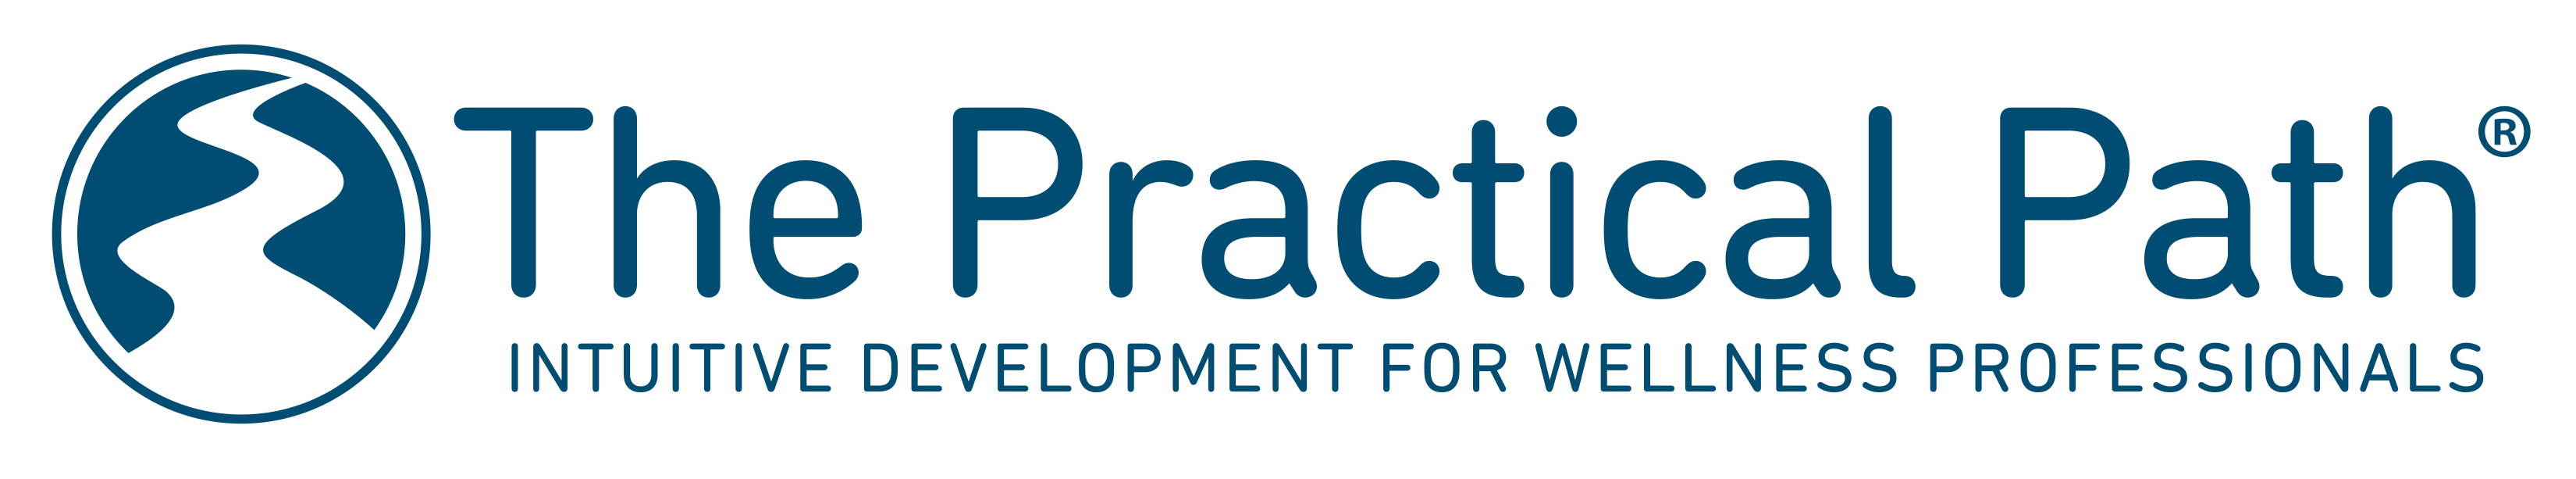 The Practical Path, Inc. - Intuitive Development for Wellness Professionals // Medical Intuitive Training™
